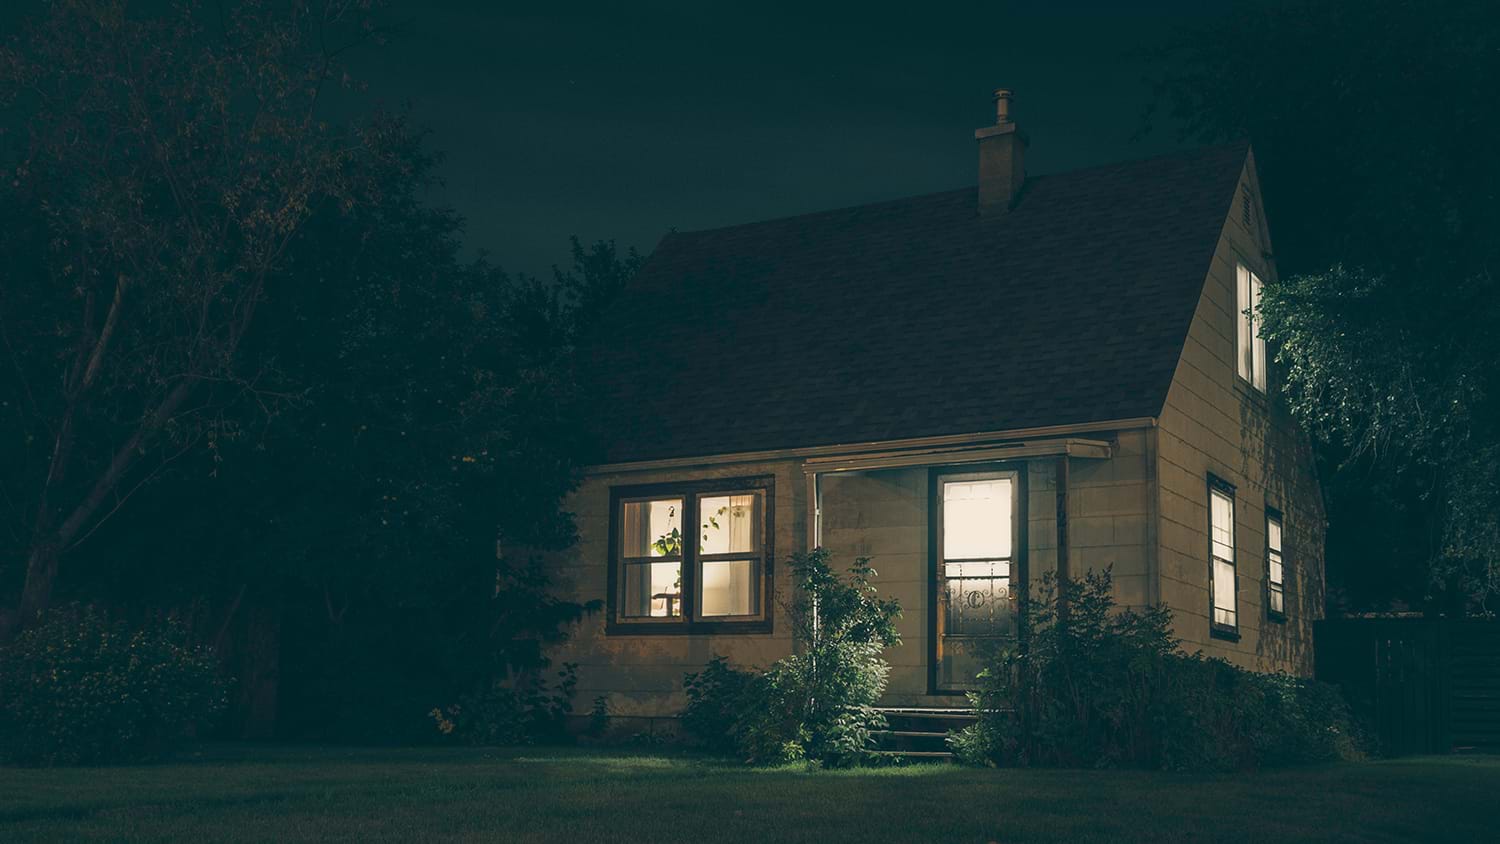 Small house with lit windows at night